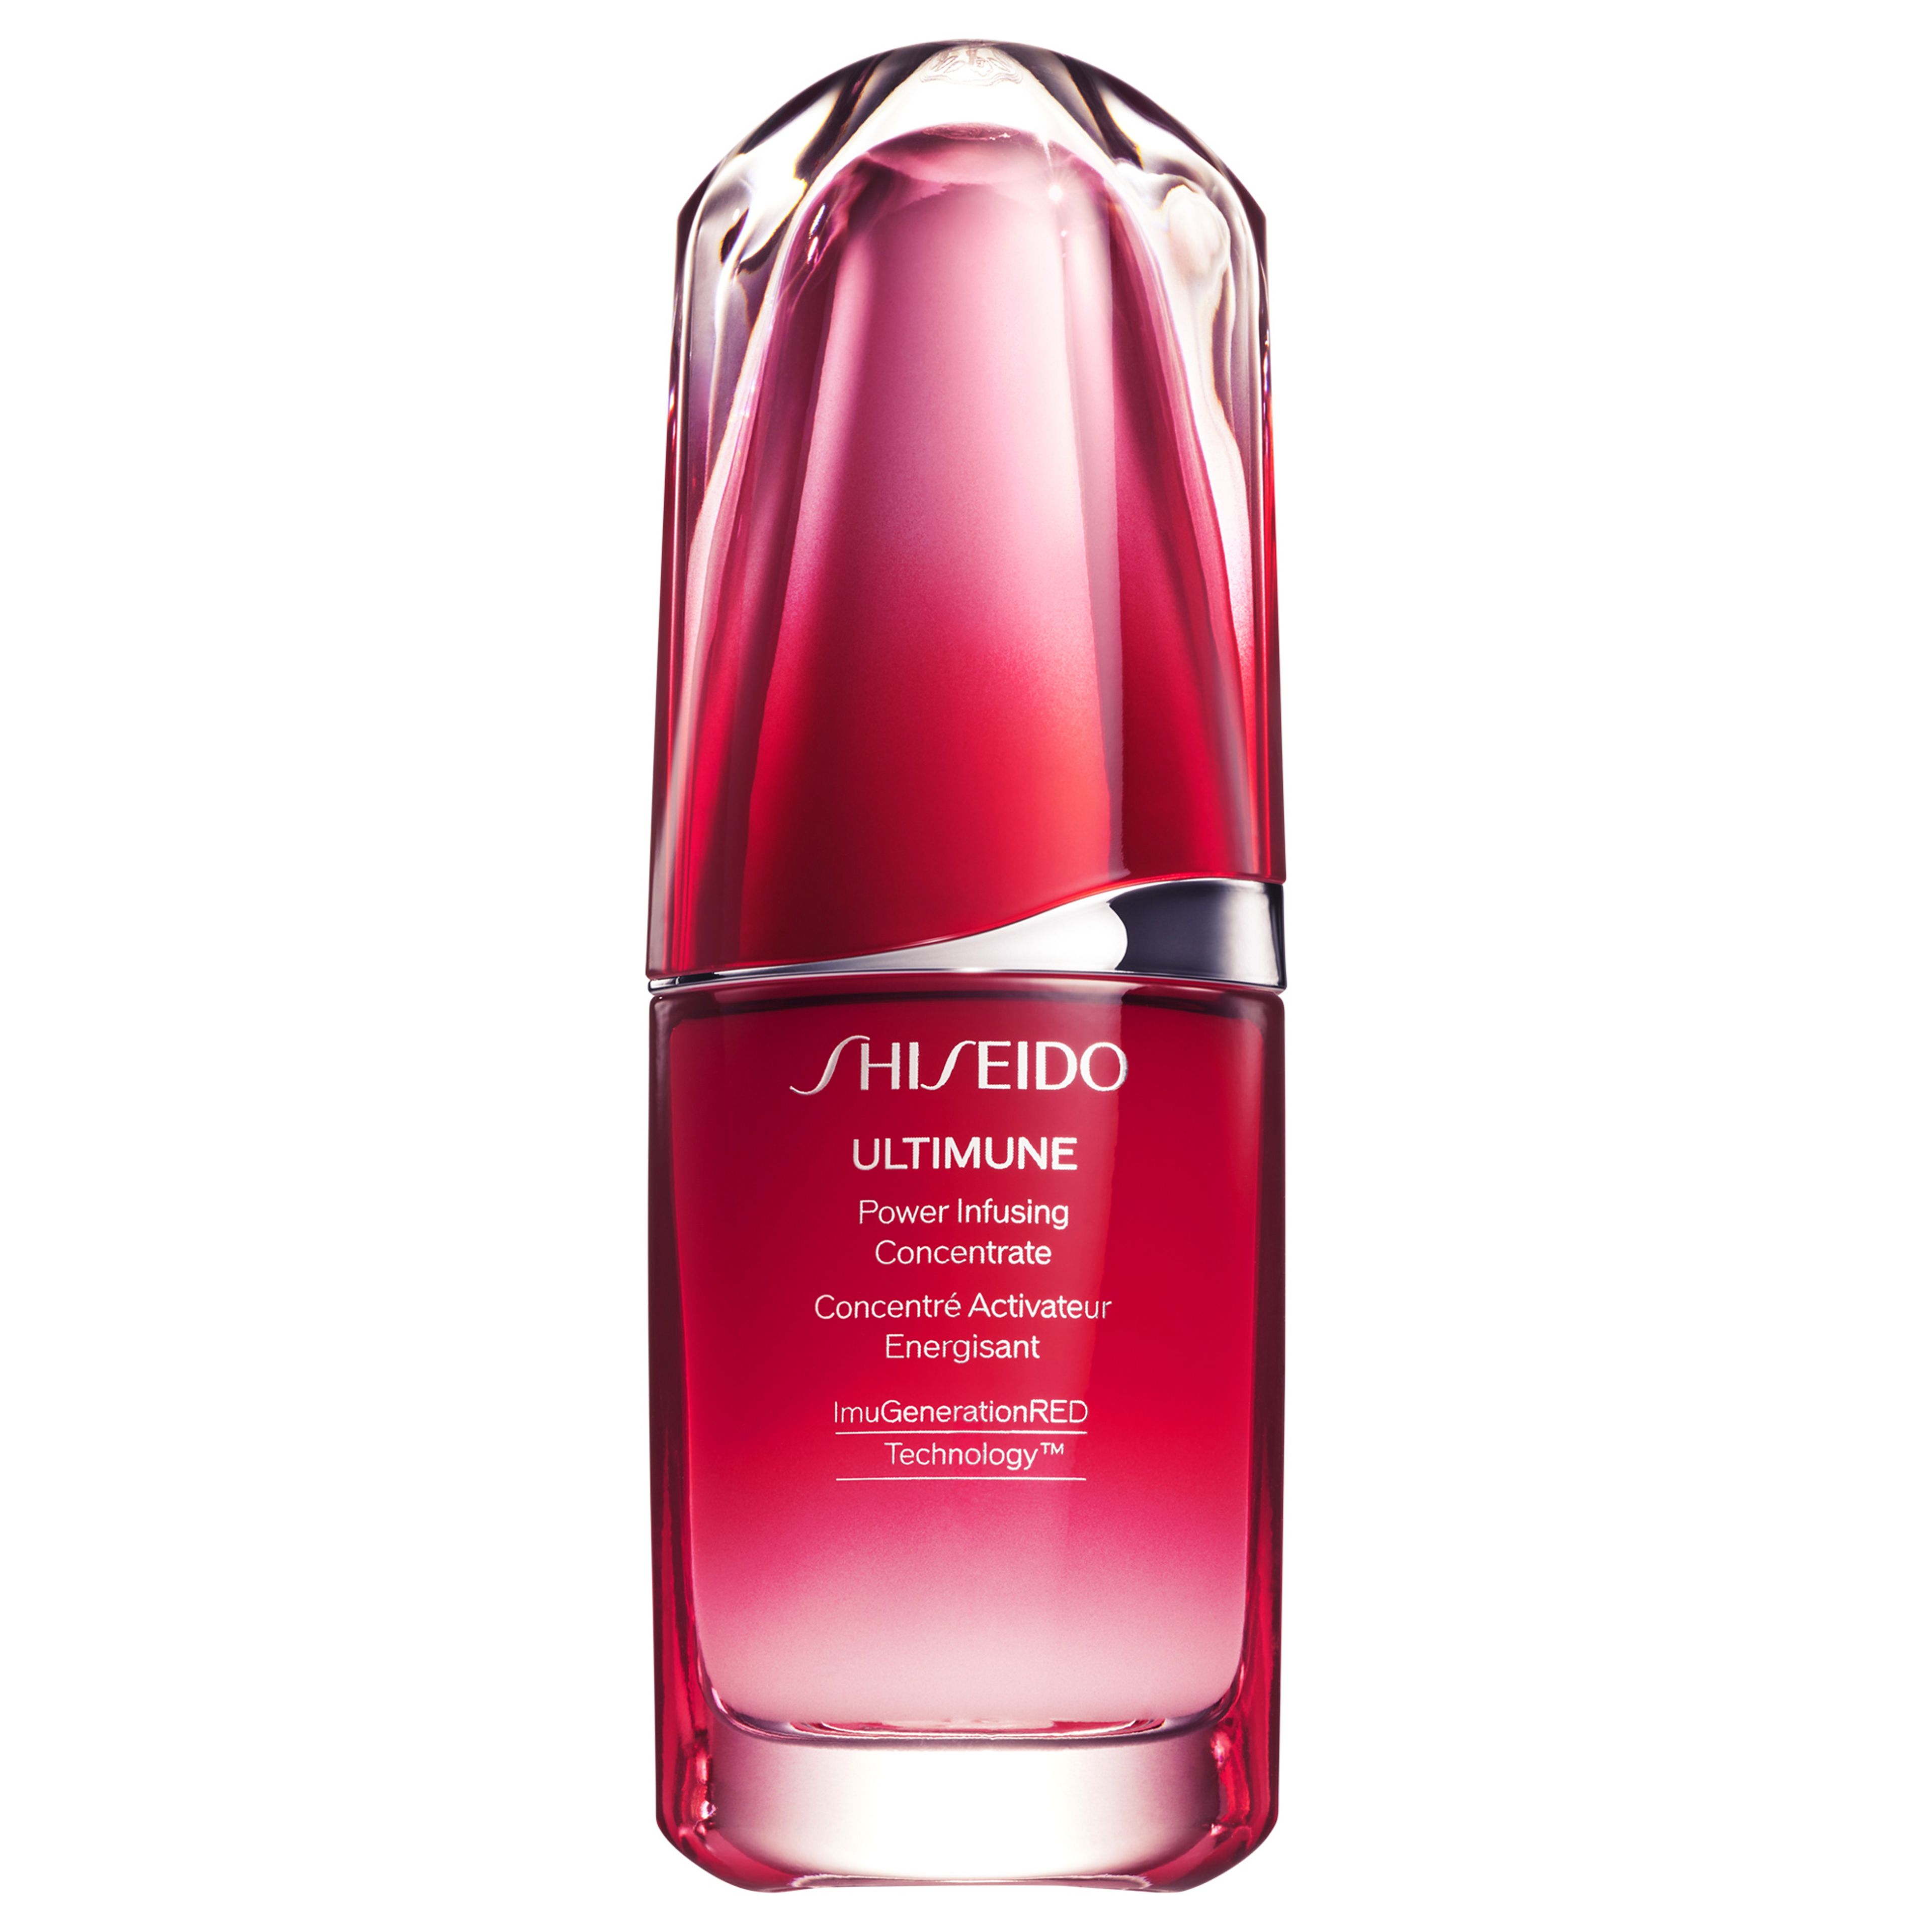 Shiseido Power Infusing Concentrate 1